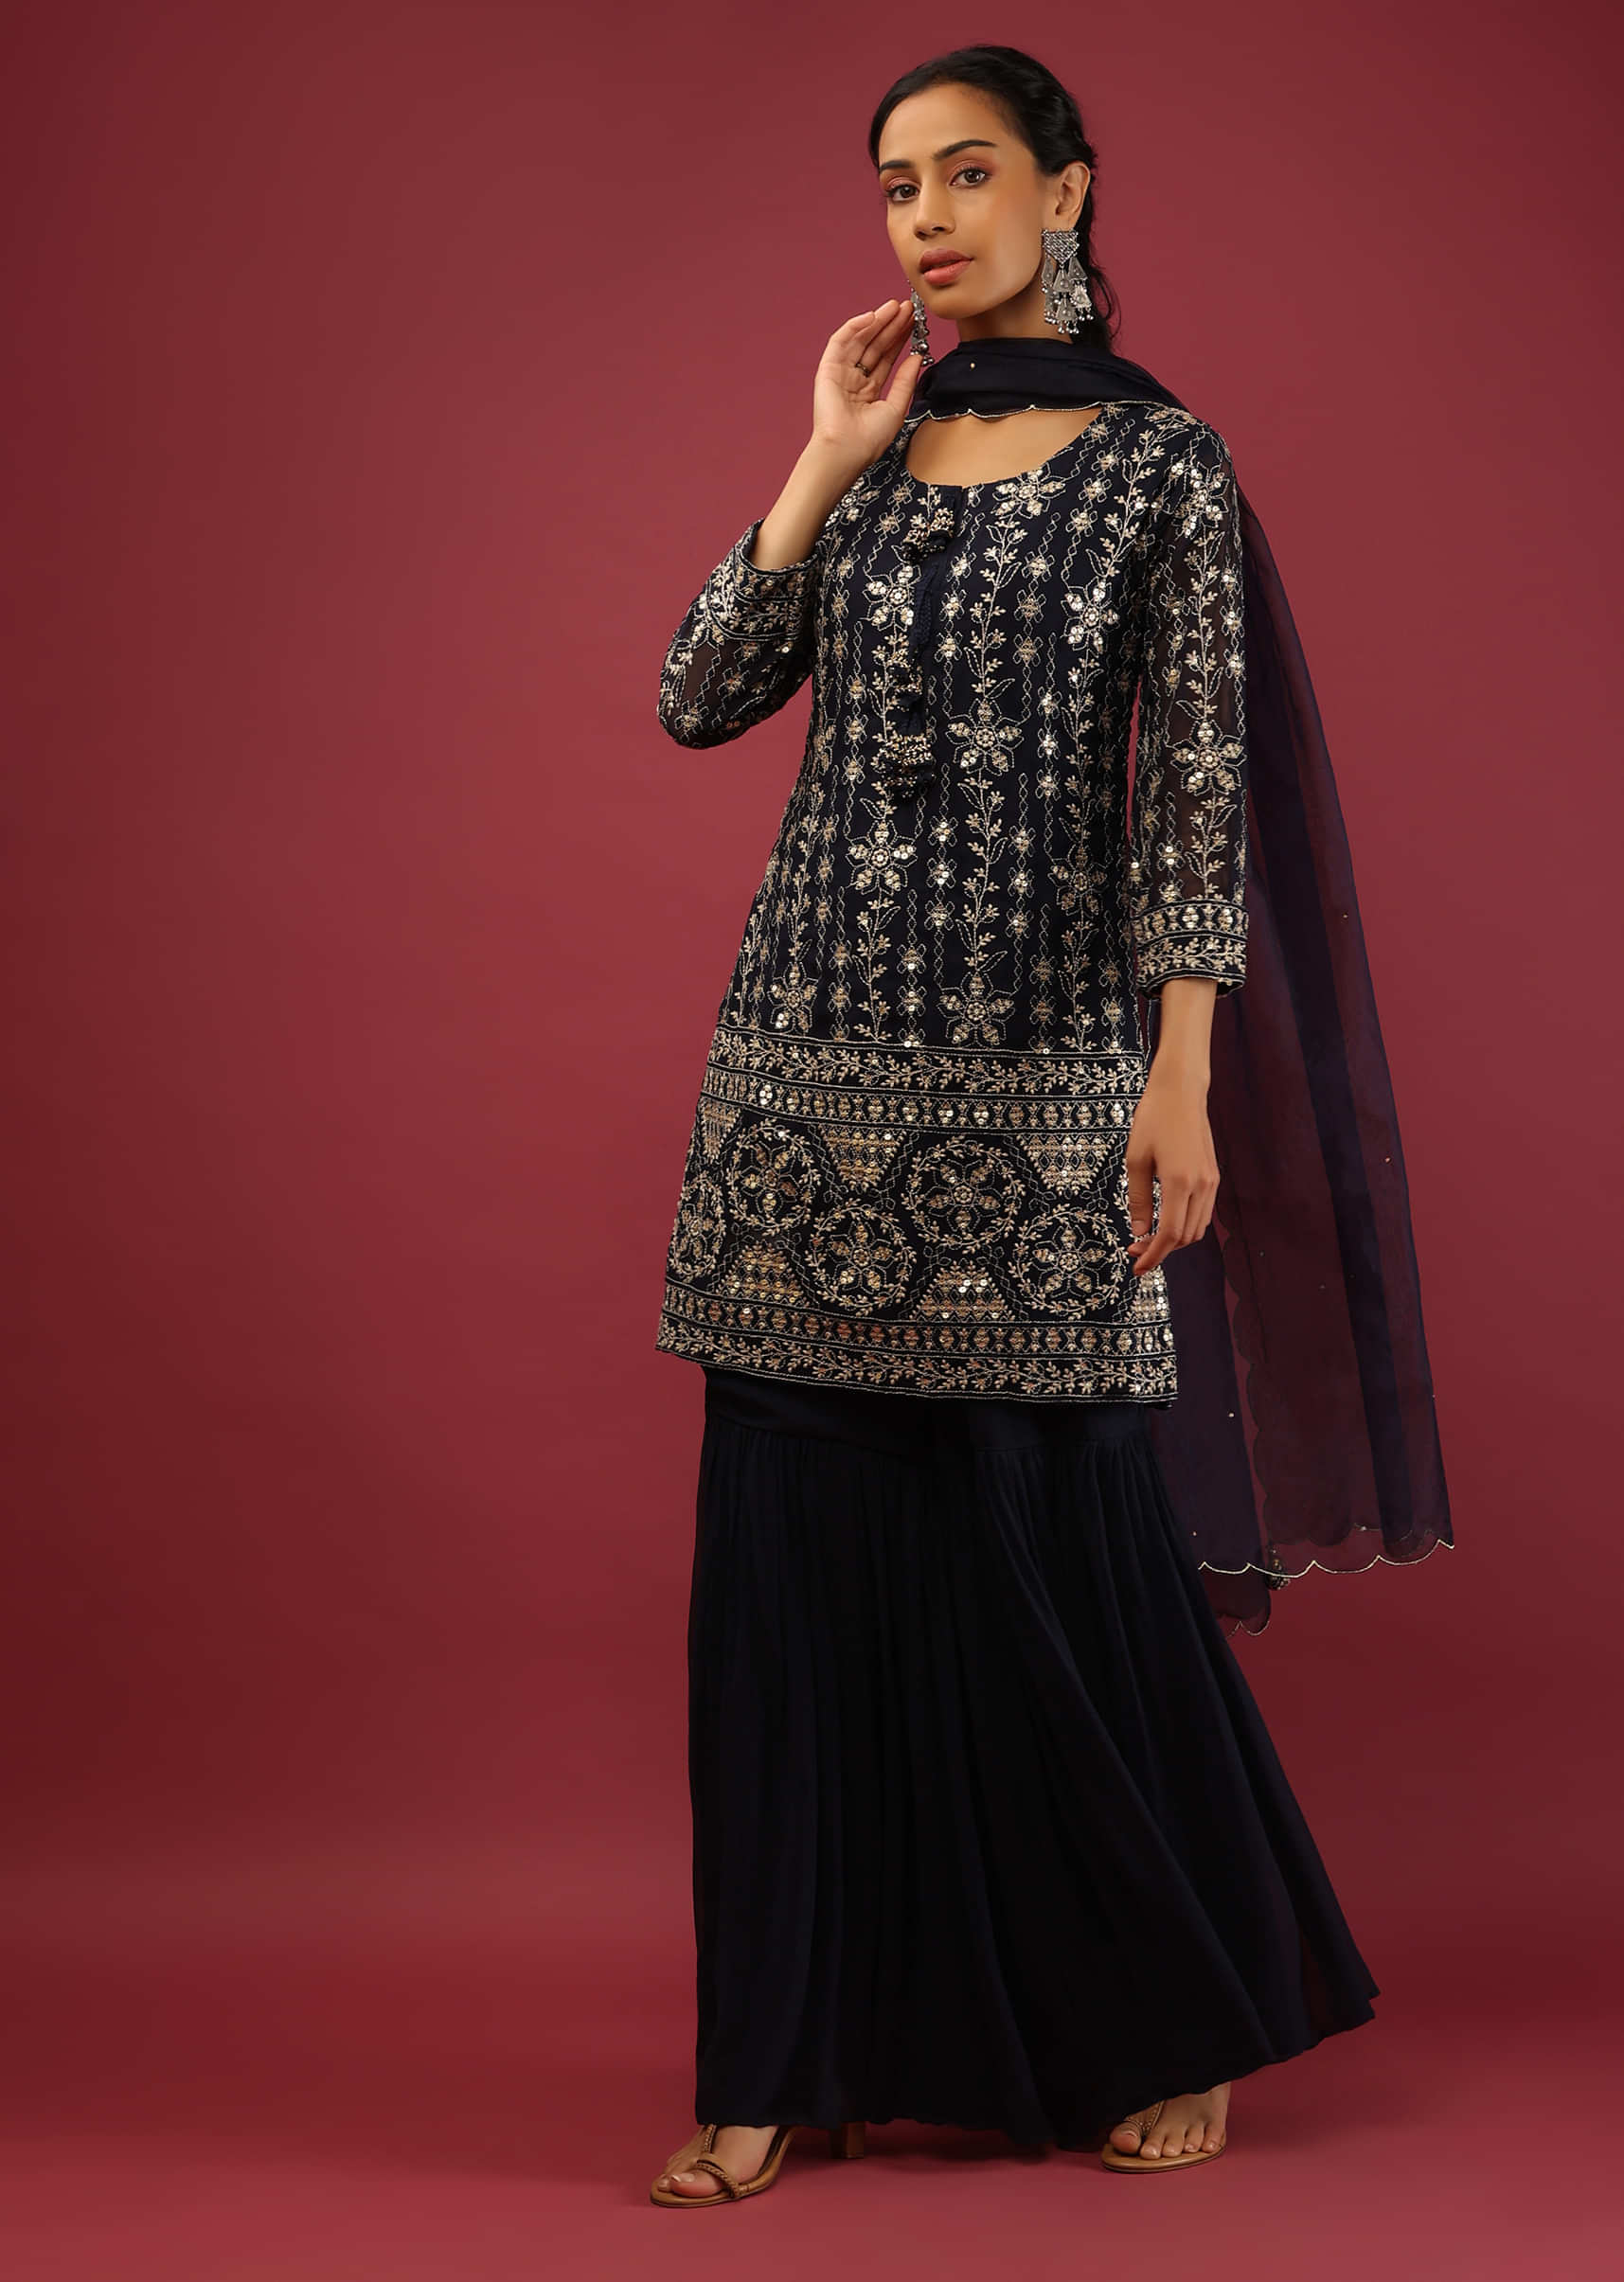 Midnight Blue Sharara Suit With Lucknowi Thread Embroidered Floral Motifs And Sequin Accents  